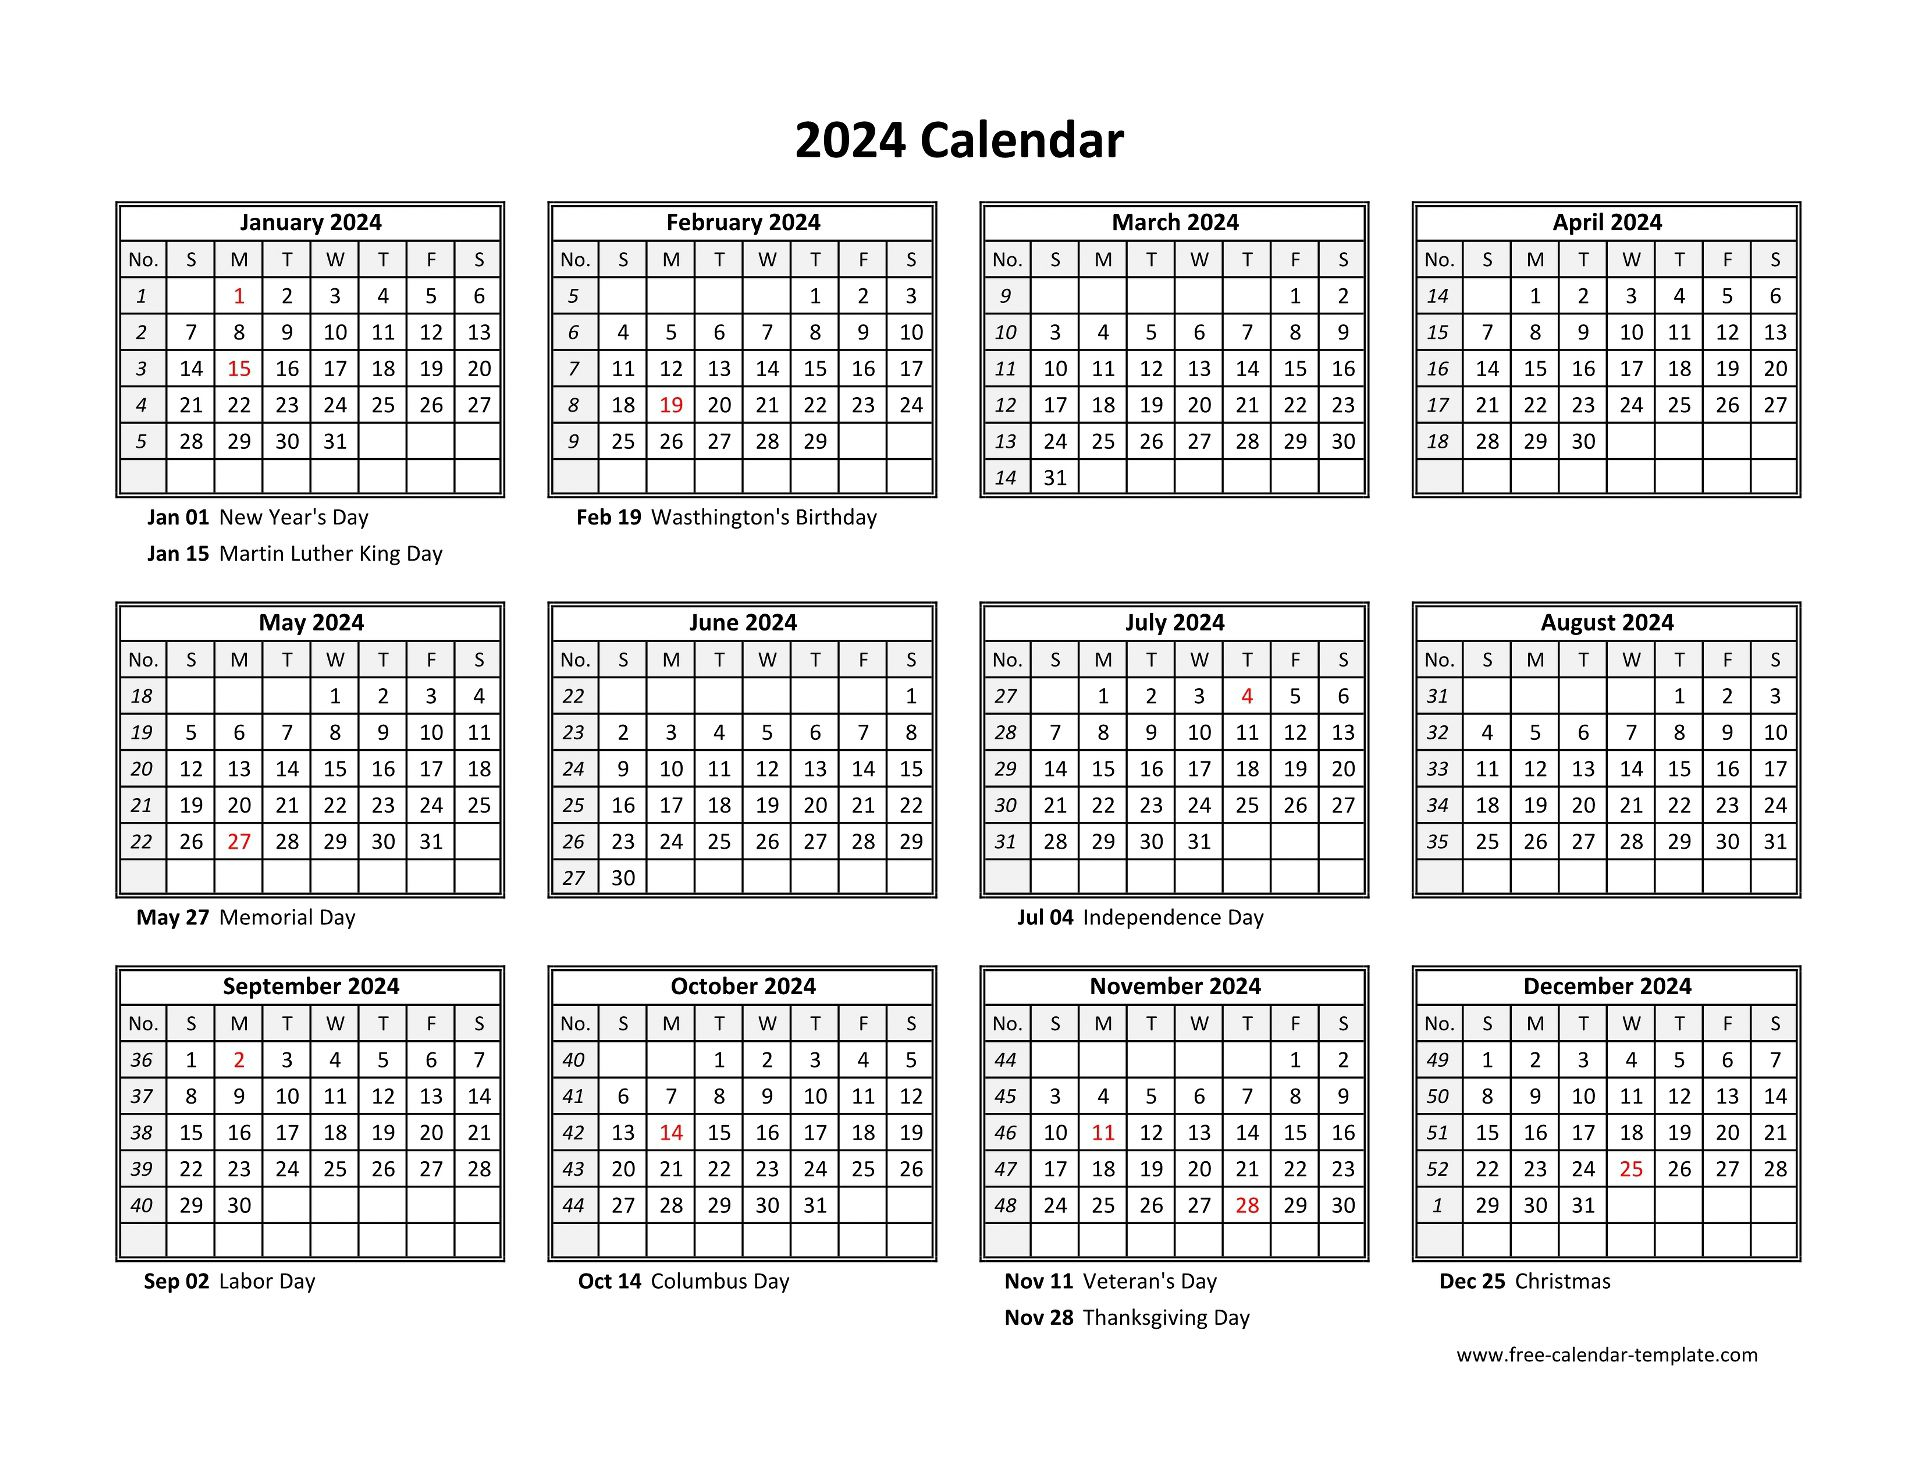 Yearly Calendar 2024 Printable With Federal Holidays | Free for 2024 Printable Calendar One Page With Federal Holidays